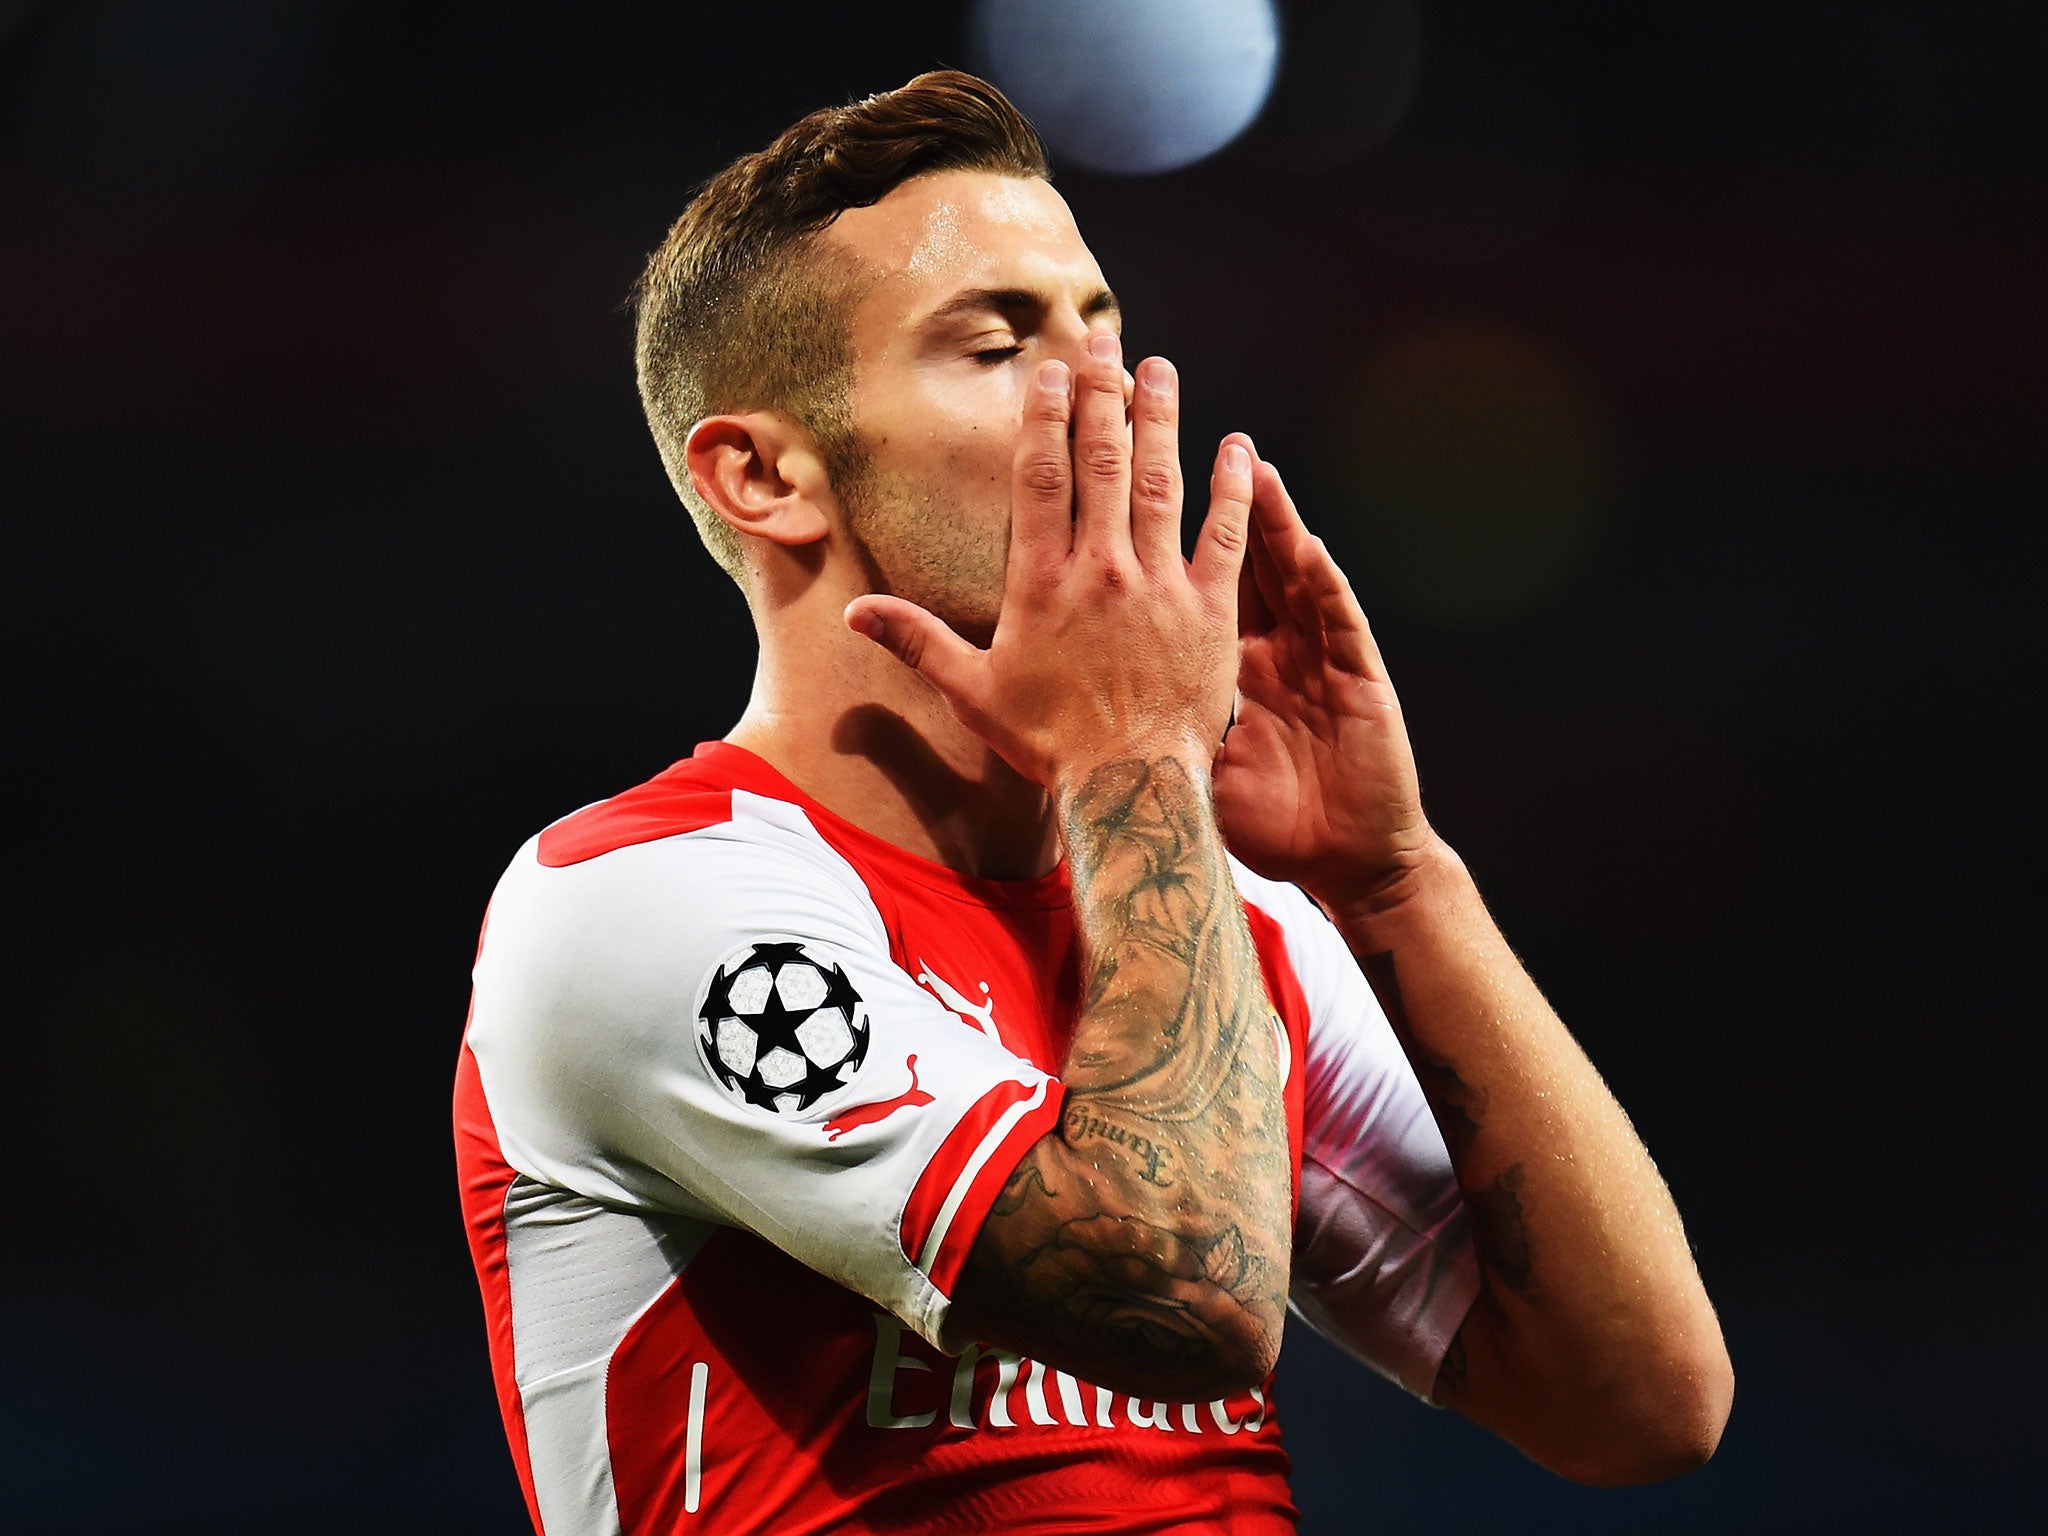 Jack WIlshere reacts after missing a good chance in Arsenal's match with Besiktas